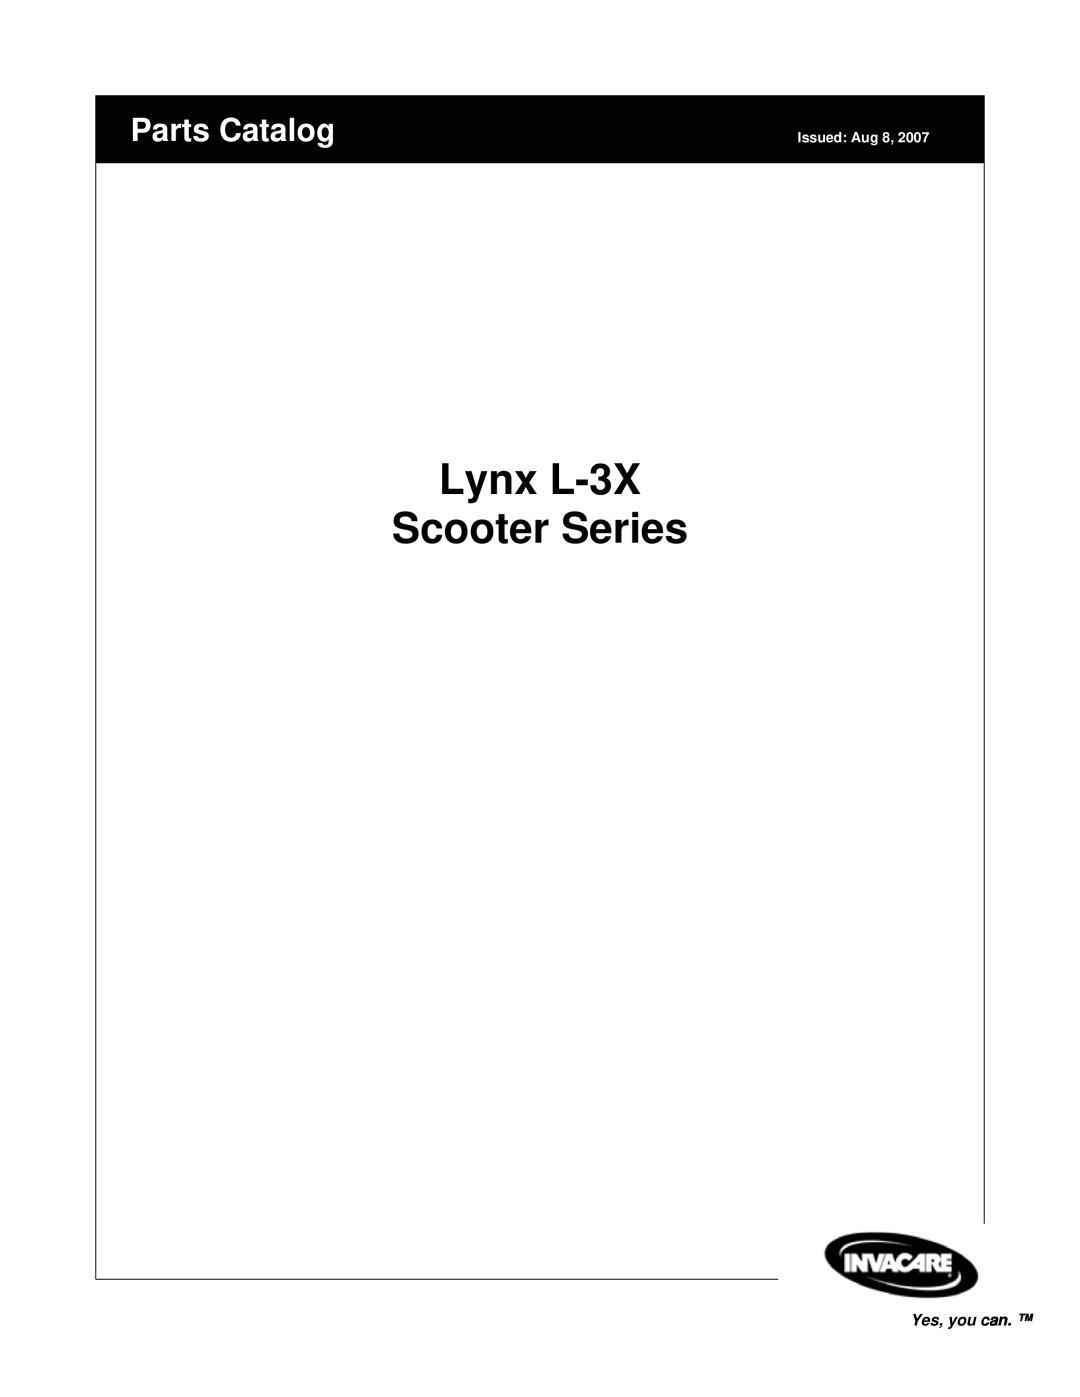 Invacare manual Lynx L-3X Scooter Series, Parts Catalog, Yes, you can, Issued Aug 8 